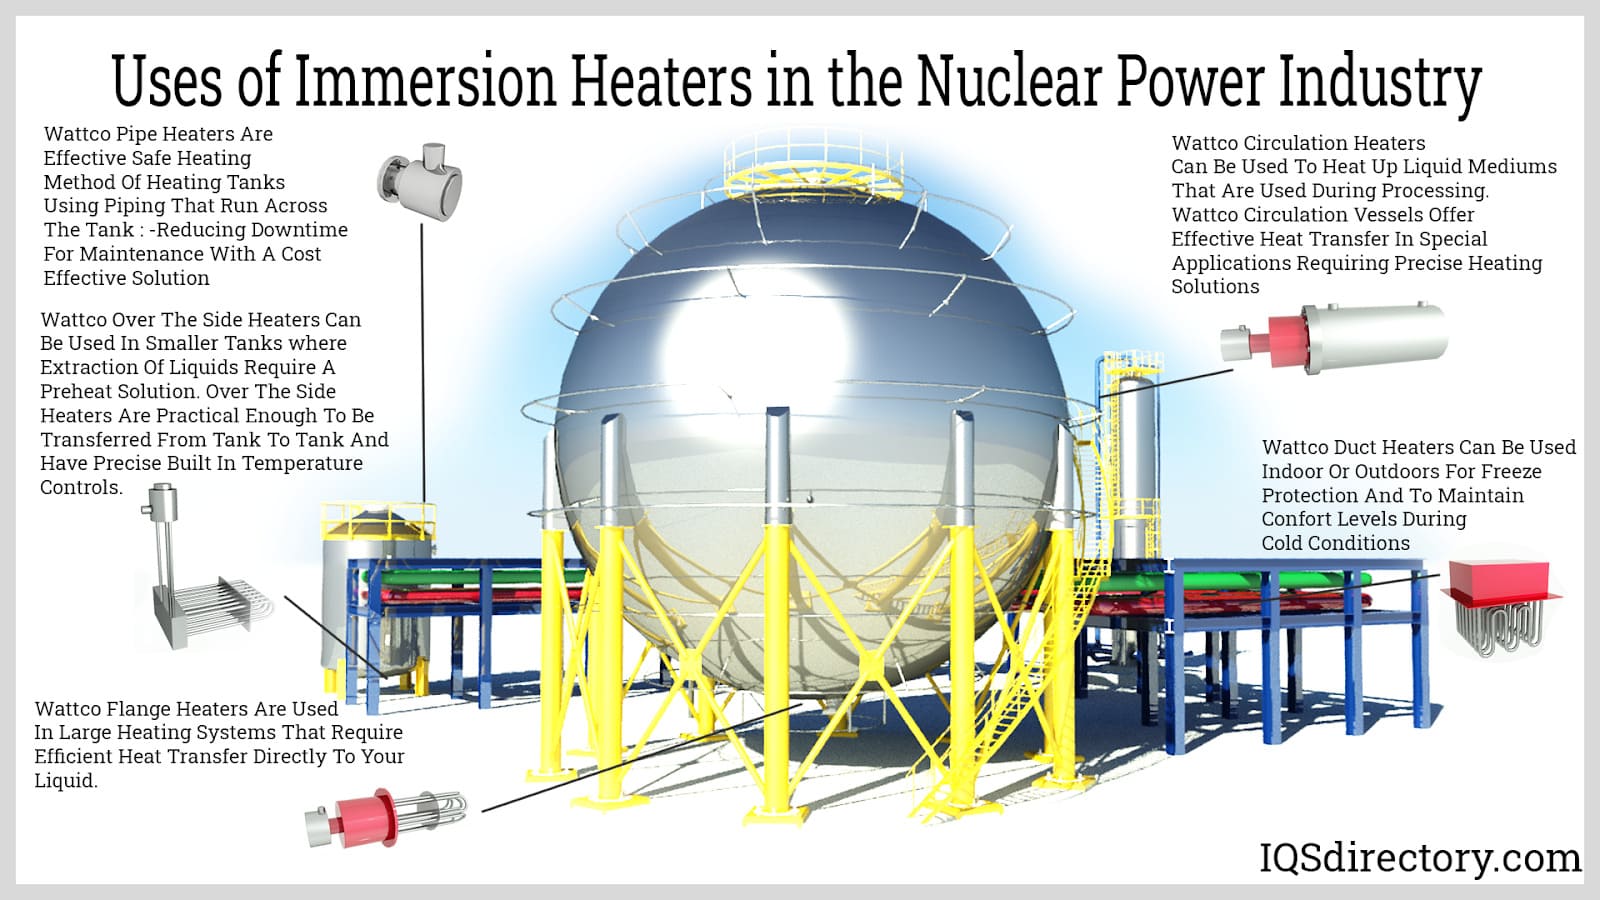 Uses of Immersion Heaters in the Nuclear Power Industry